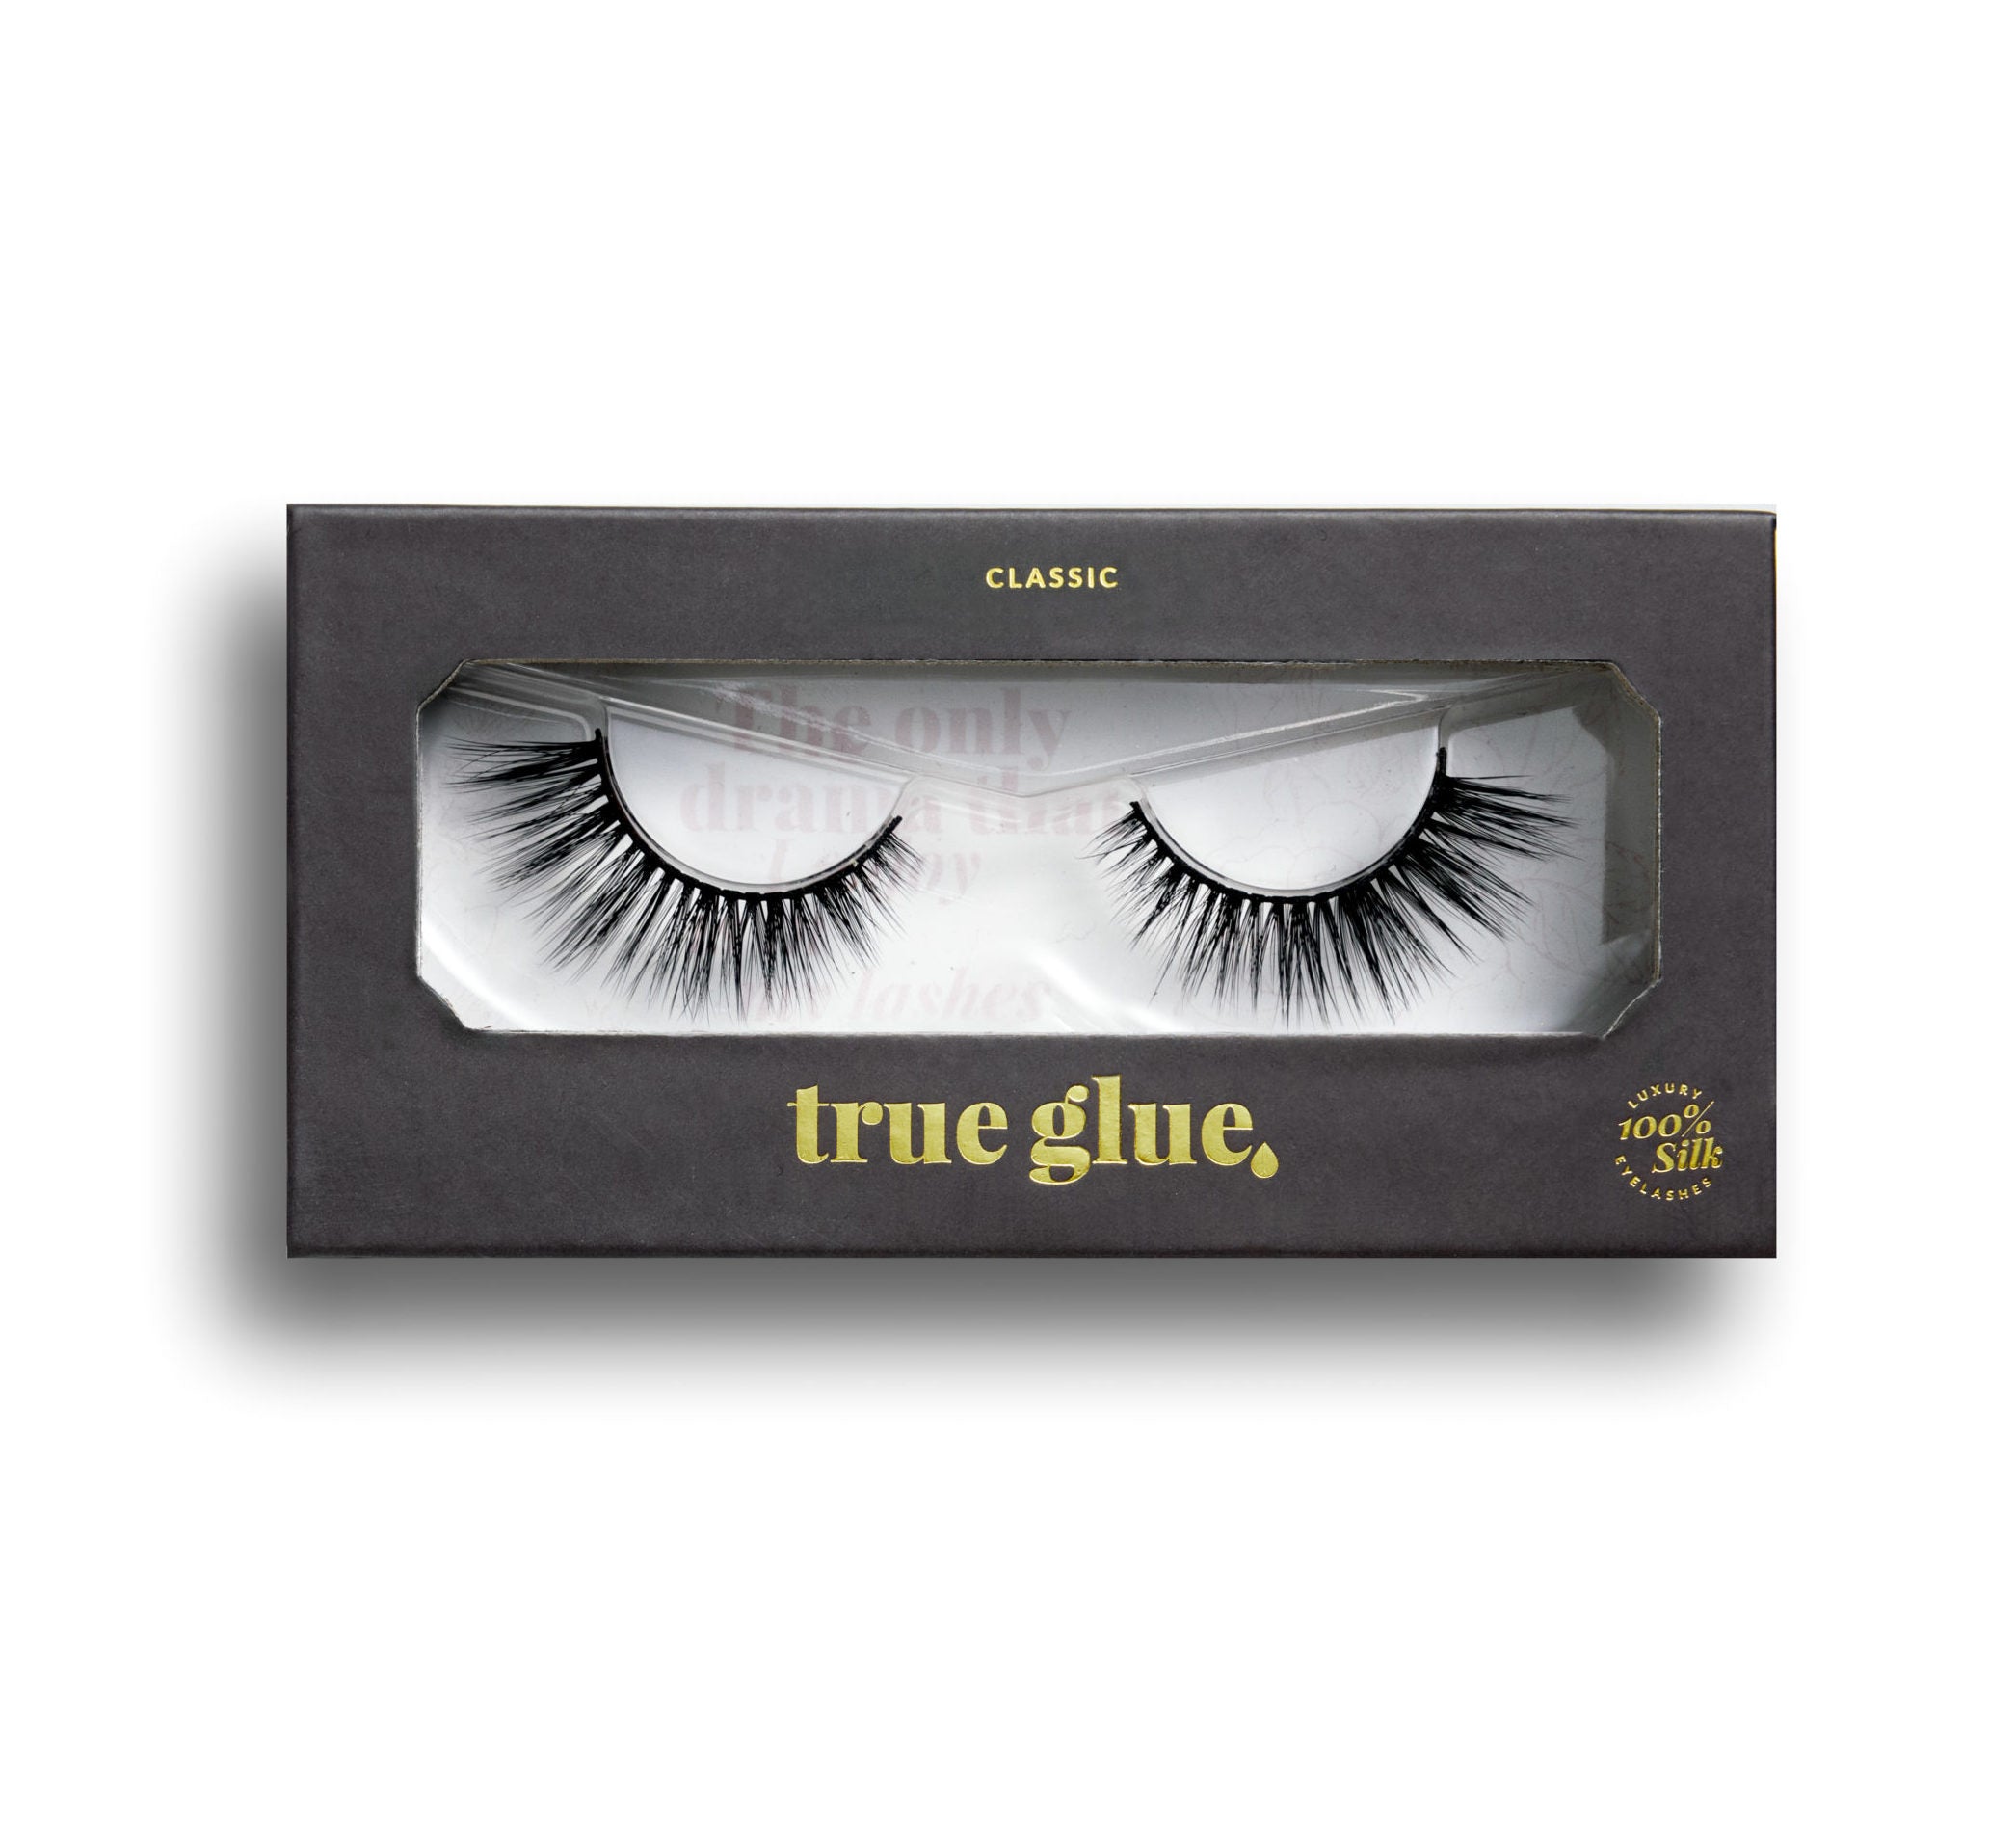 Lashes in the style classic